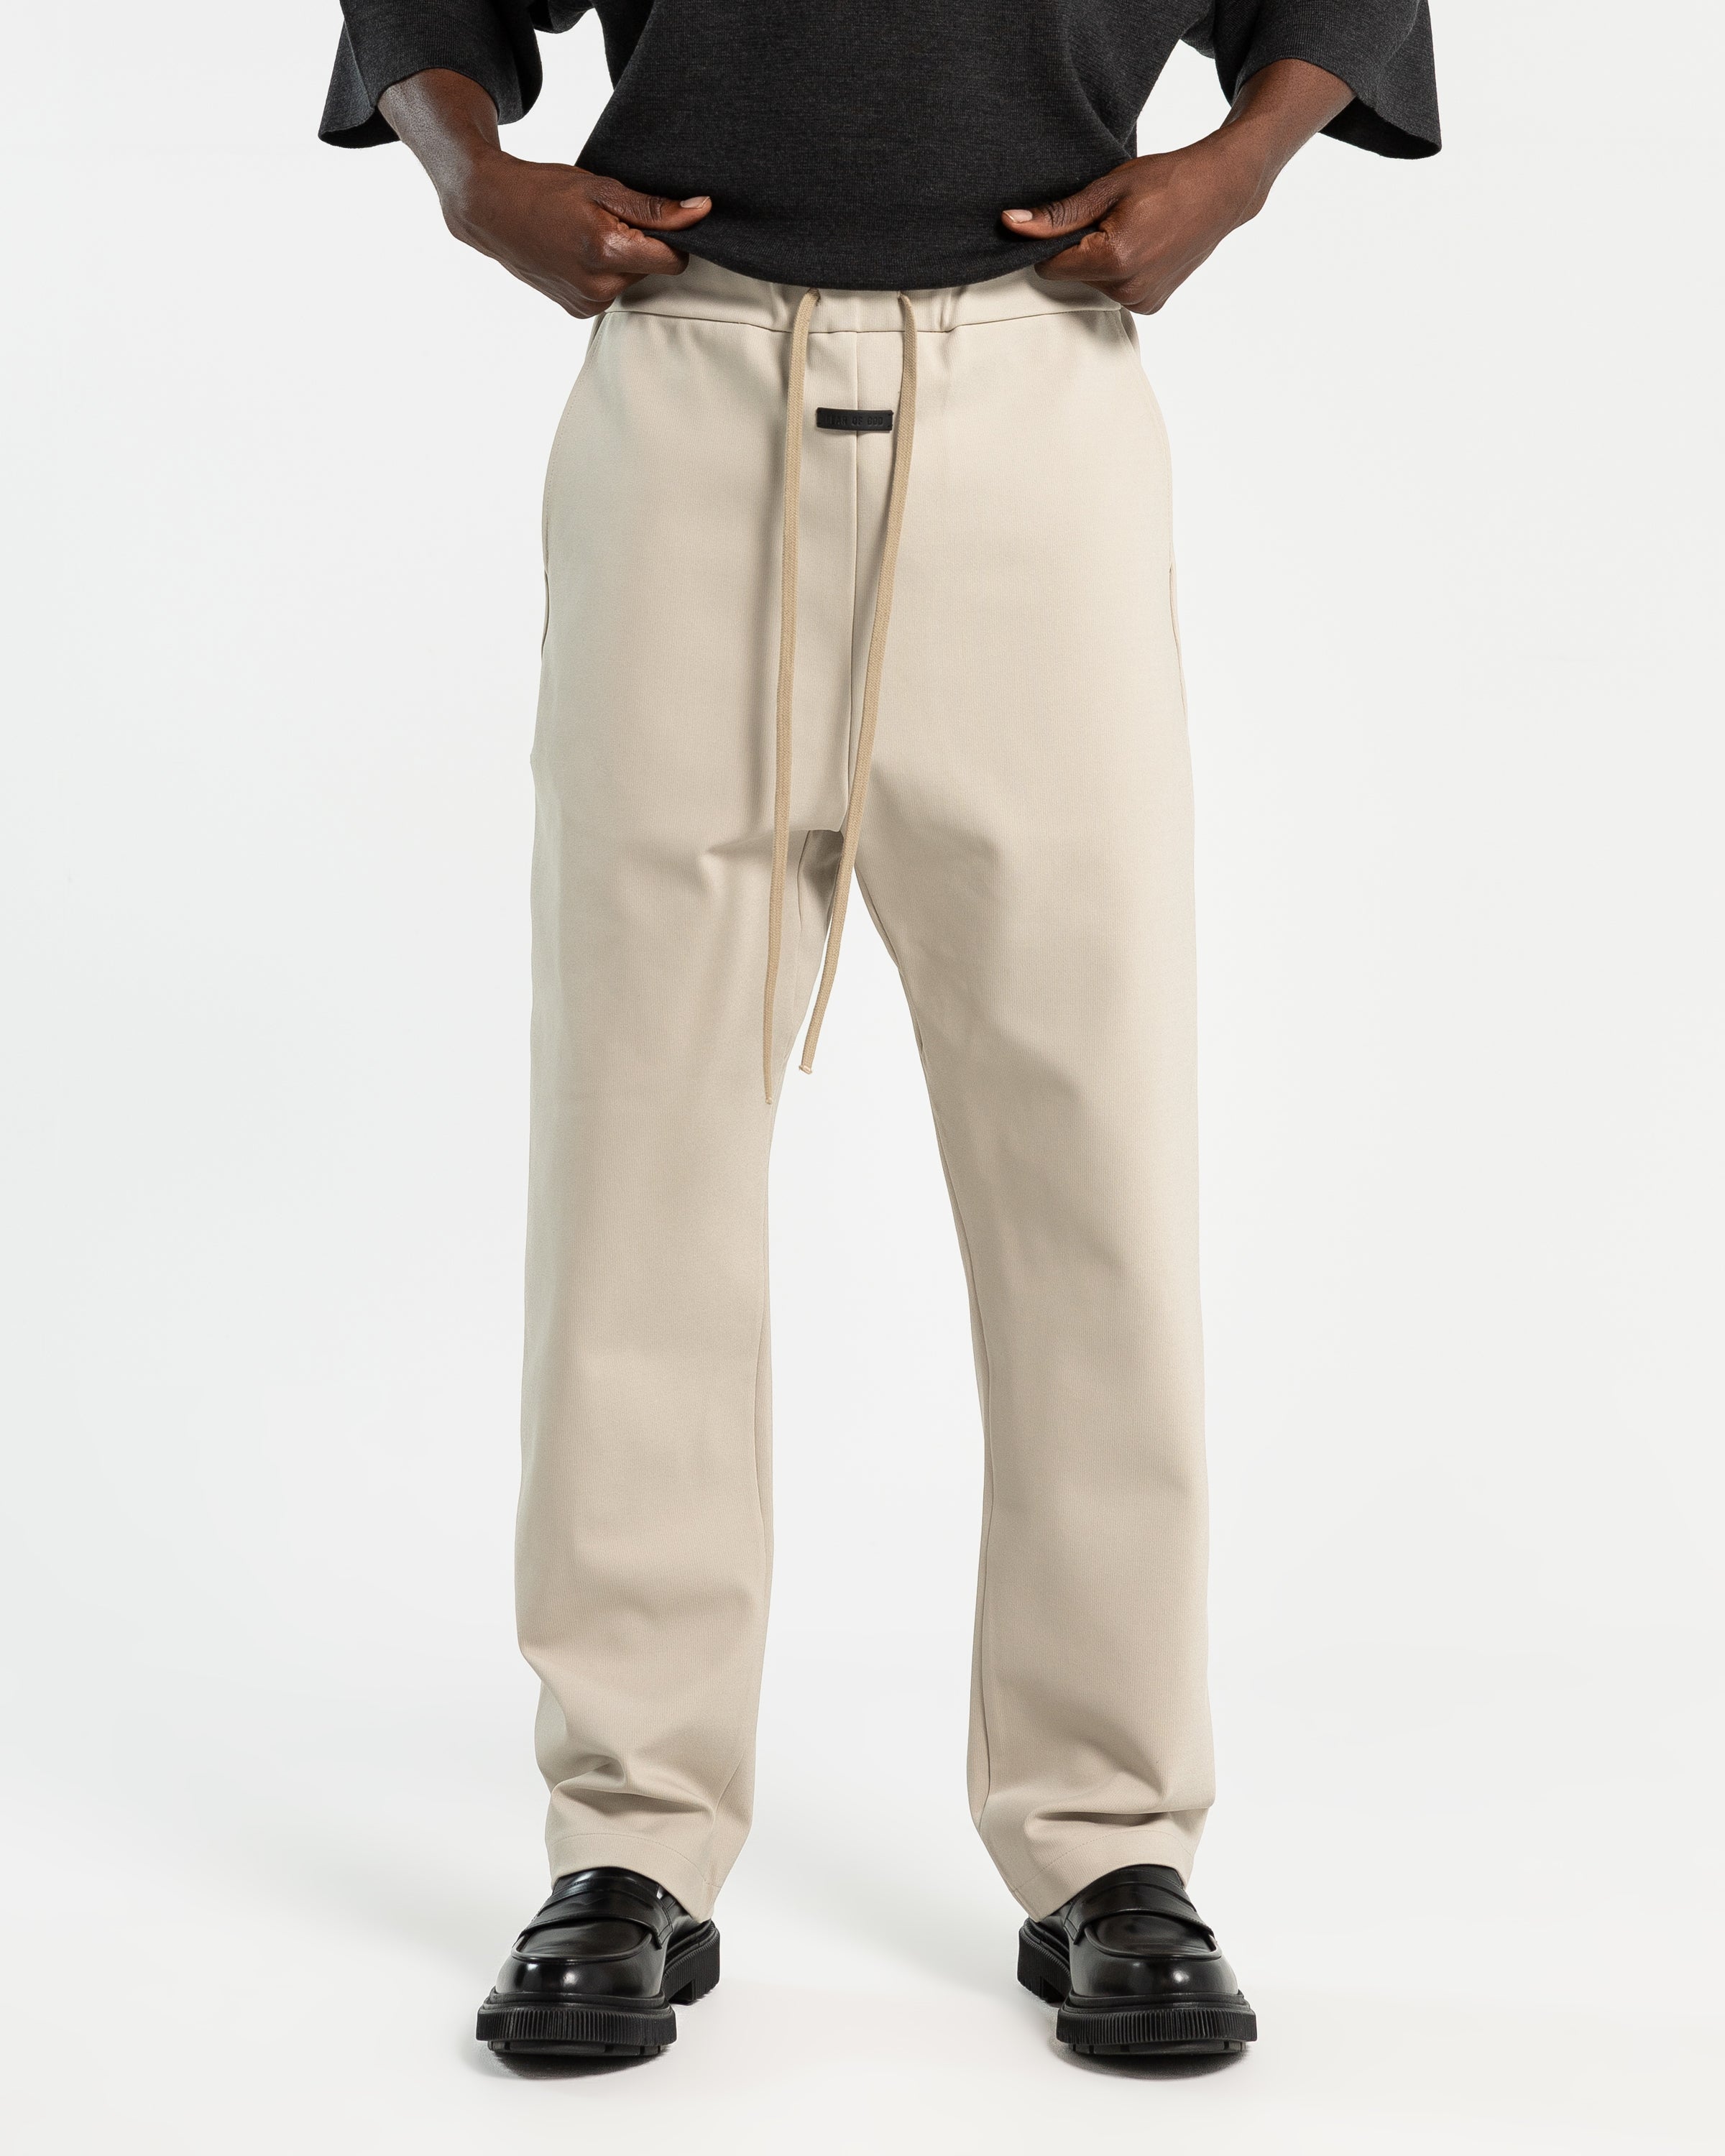 Viscose Tricot Relaxed Pant in Cement